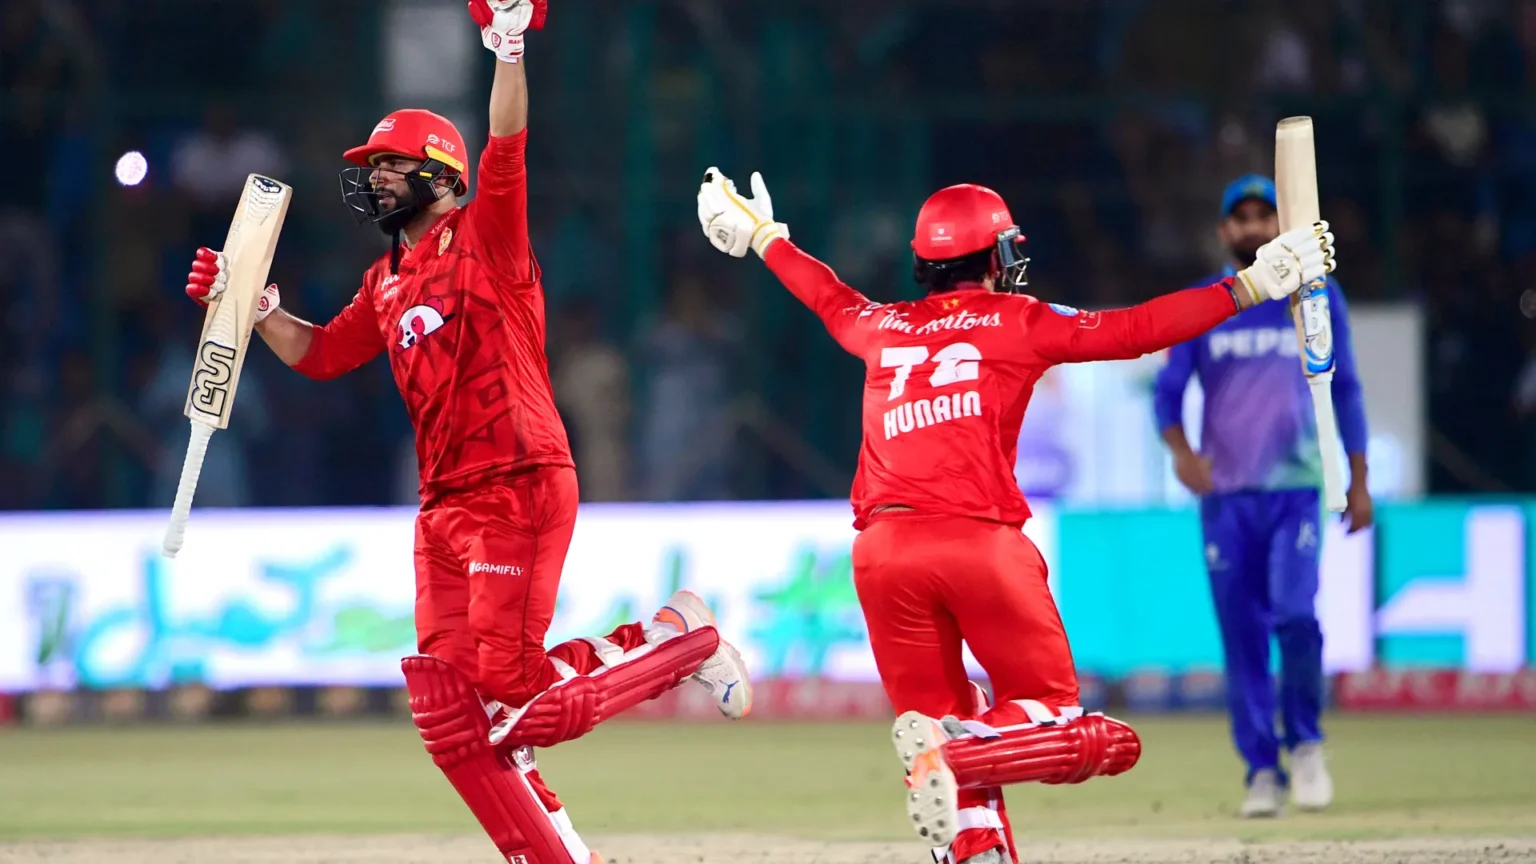 islamabad-united-bagged-the-third-psl-title-after-beating-multan-sultans-in-the-final